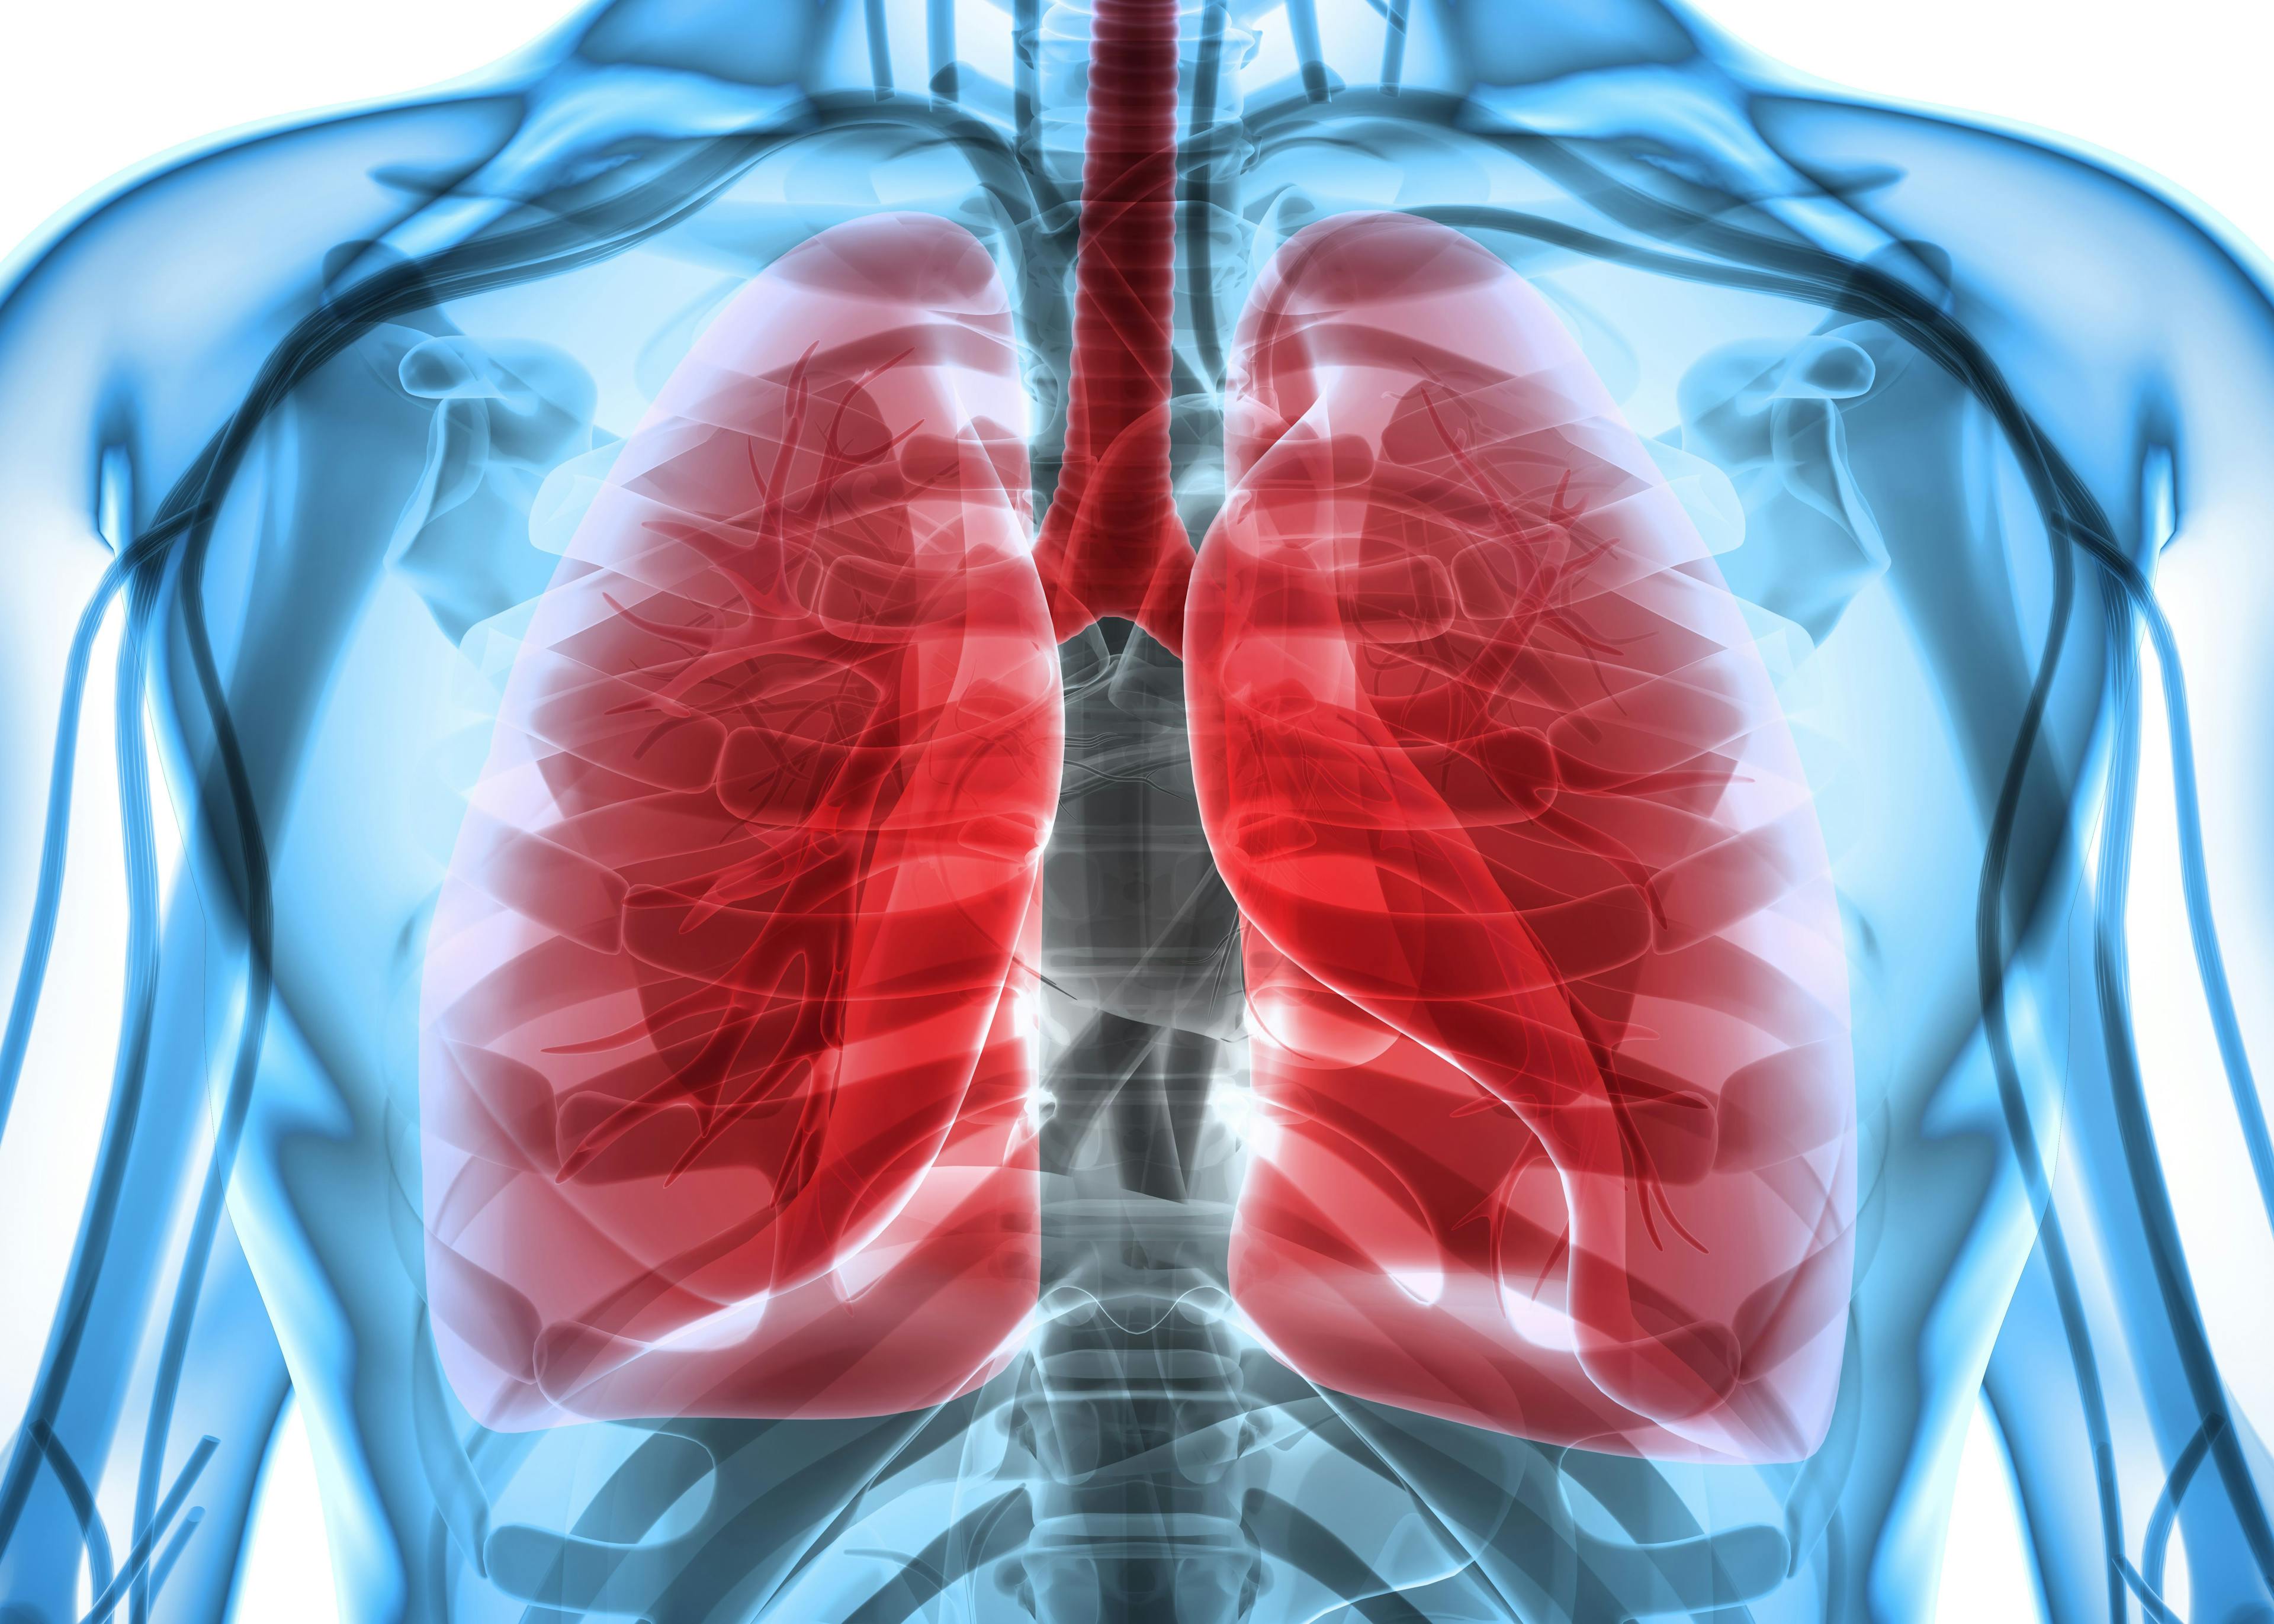 Patients with HER2-mutated metastatic non–small cell lung cancer who have previously received treatment with systemic therapies appear to benefit from treatment with fam-trastuzumab deruxtecan-nxki, which received priority review from the FDA.